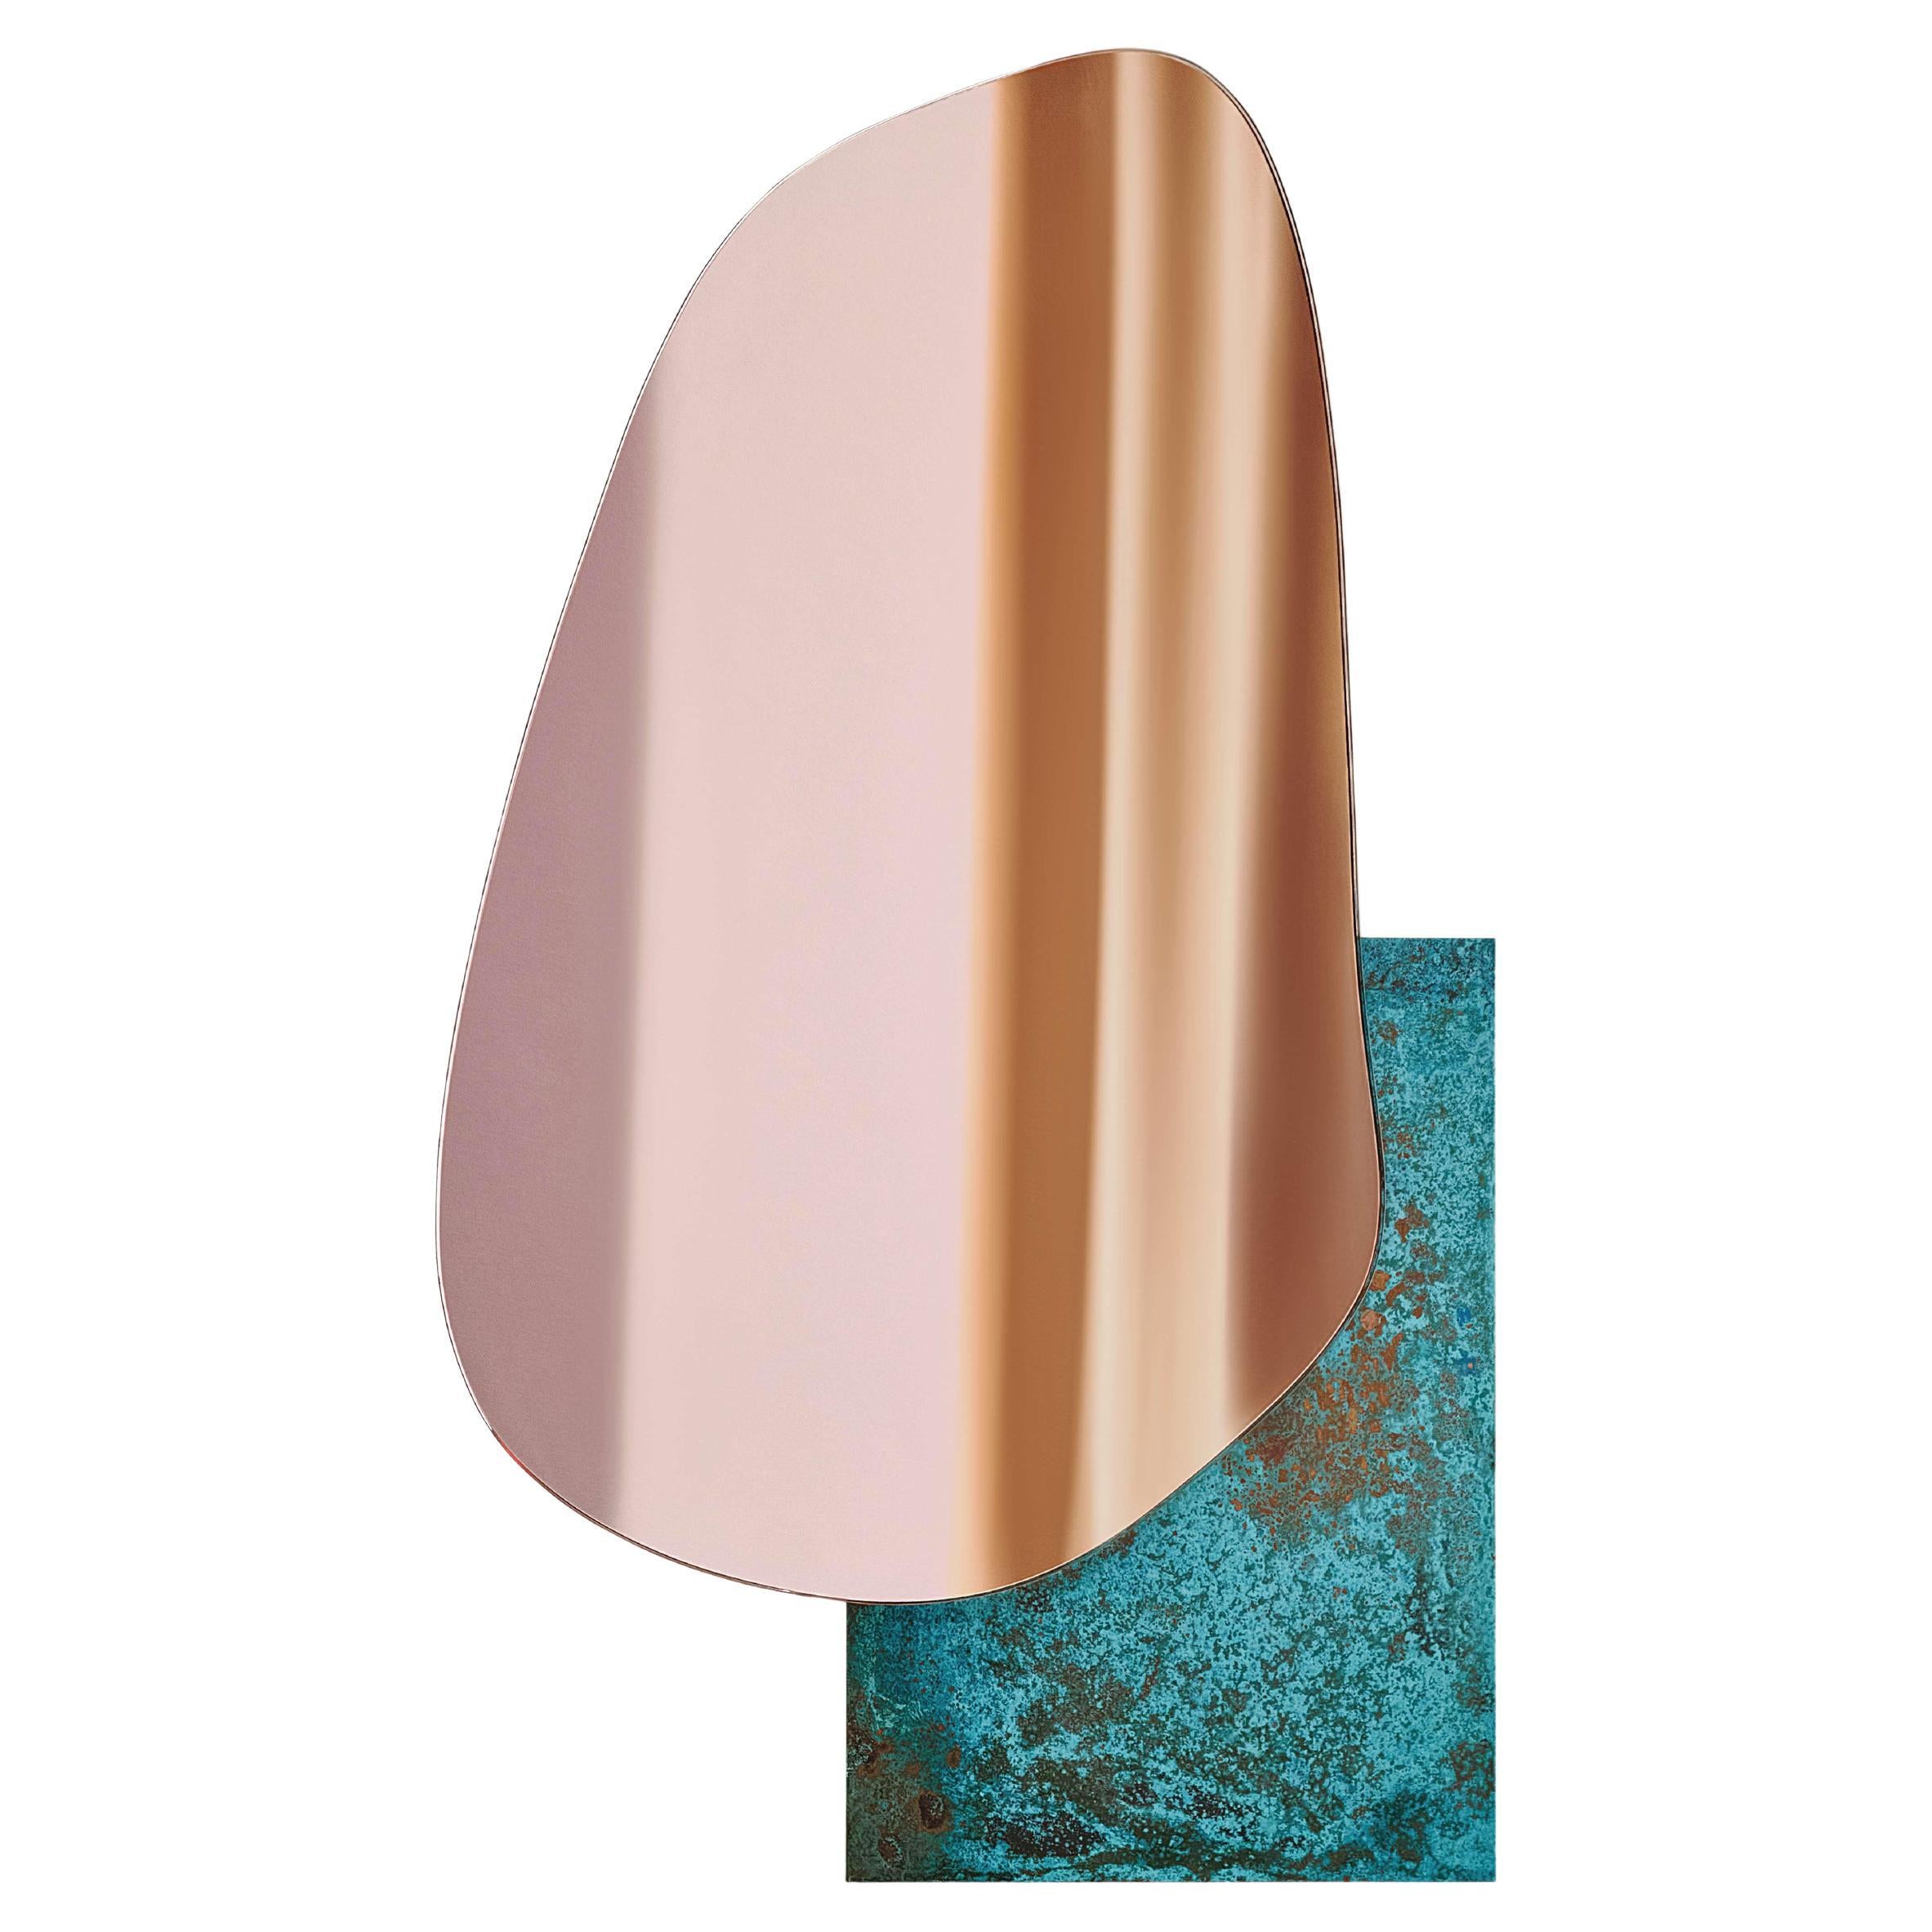 Painted Modern Wall Mirror Lake 3 by Noom with Burned Steel Base and Copper Tint Mirror